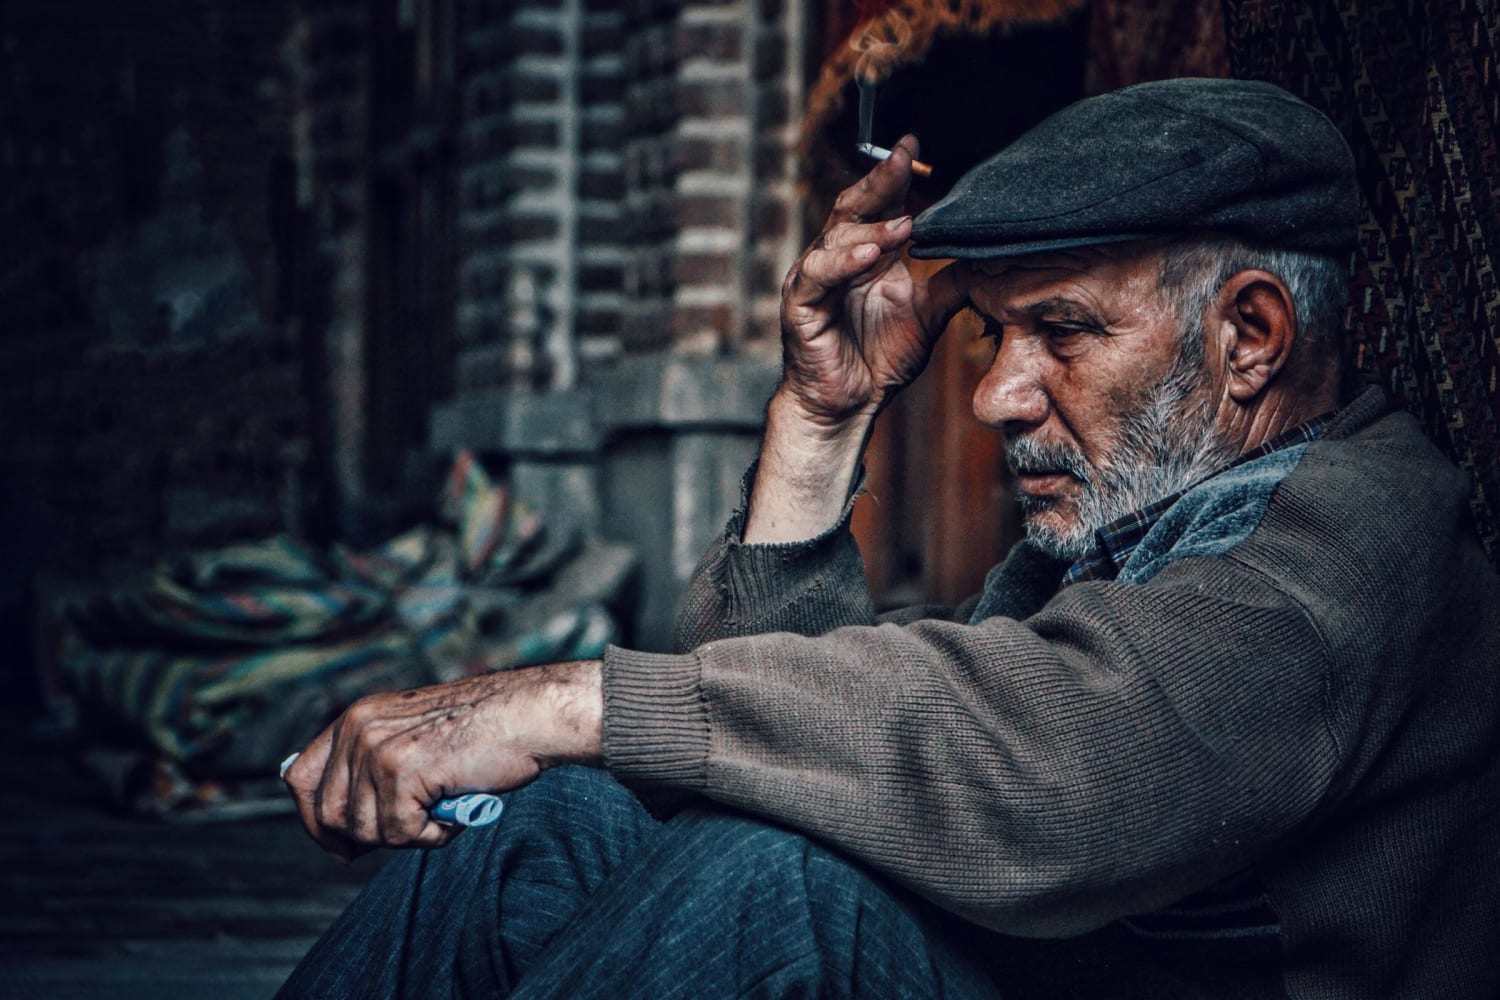 Tabriz Grand Bazaar, Tabriz, Iran. A man lit his cigarette and focused his eyes to infinity. He looked so tired and sad. Photographer Hasan Almasi.